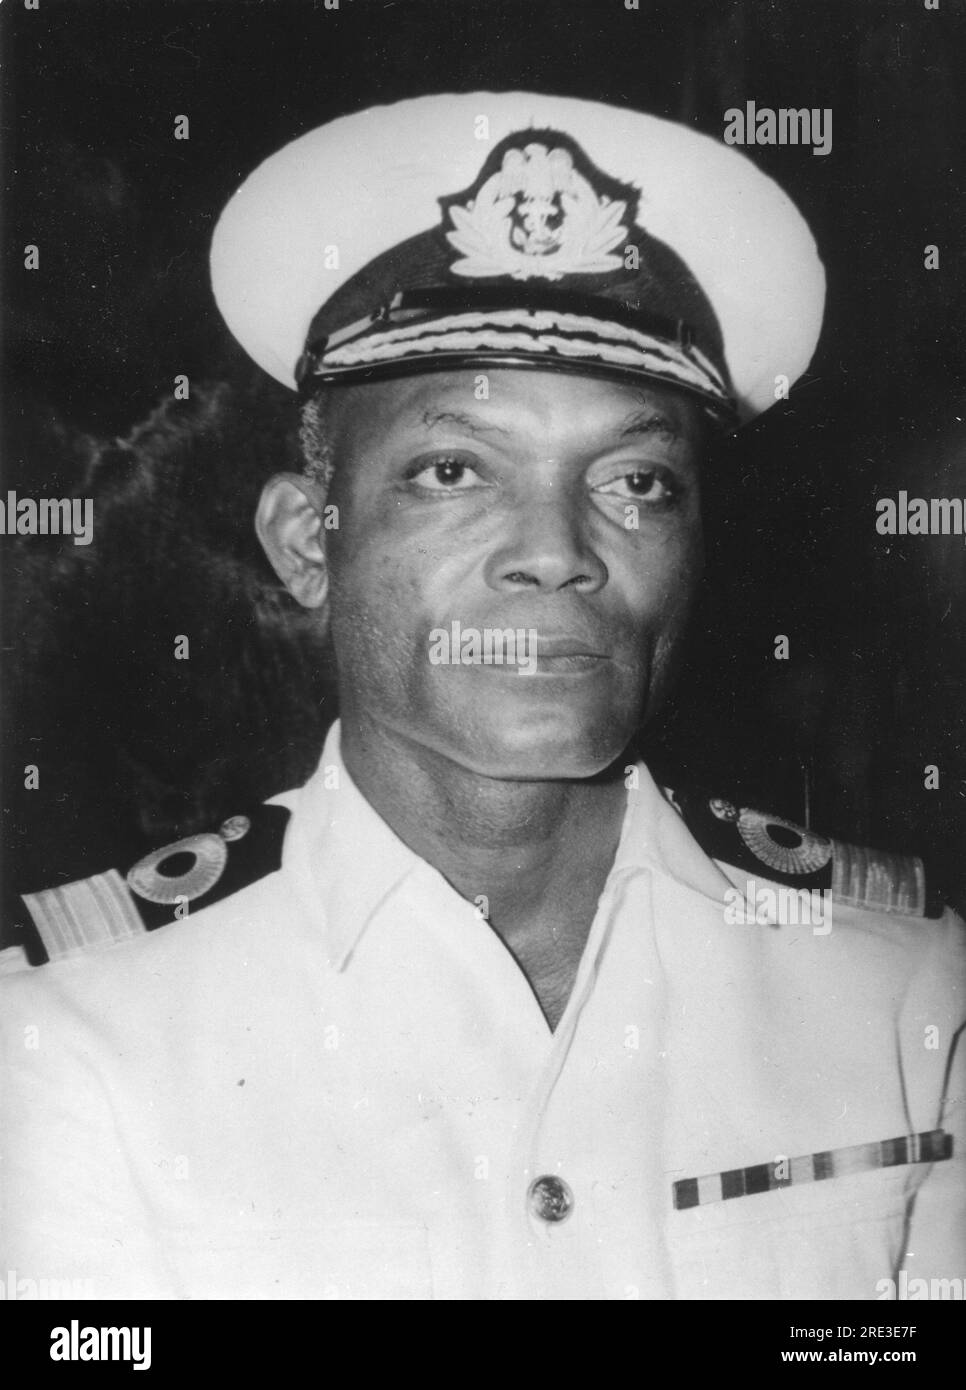 Wey, Joseph Edet Akinwale, 6.3.1918 - 12.12.1991, ufficiale di marina nigeriano, ADDITIONAL-RIGHTS-CLEARANCE-INFO-NOT-AVAILABLE Foto Stock